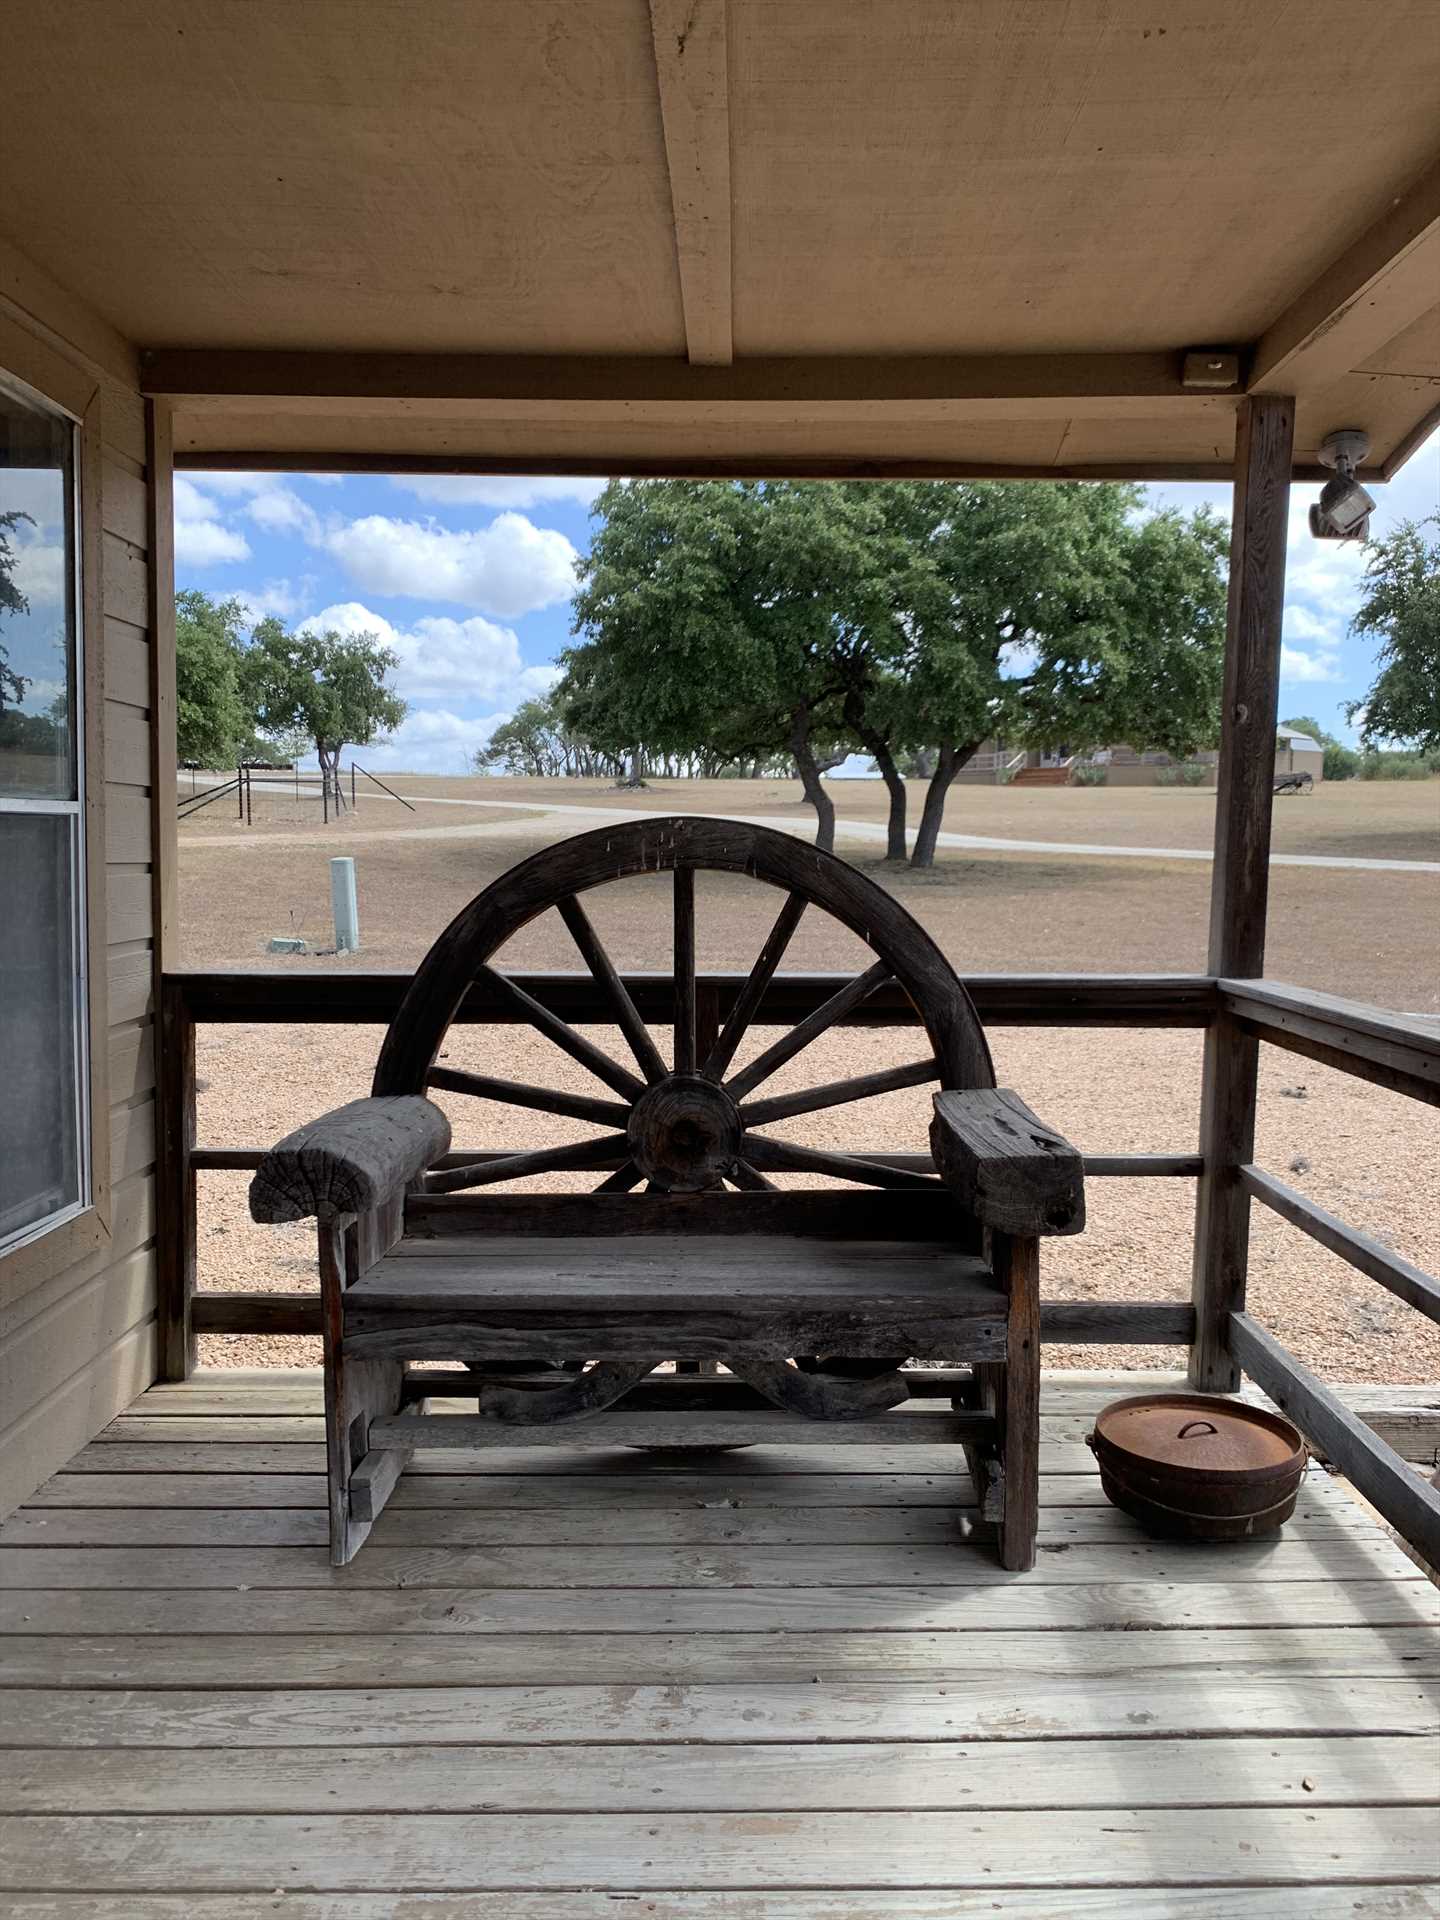                                                 Relaxing shaded spots and touches like the wagon wheel decor at the pavilion make Tabasco Ranch a truly Texan experience.